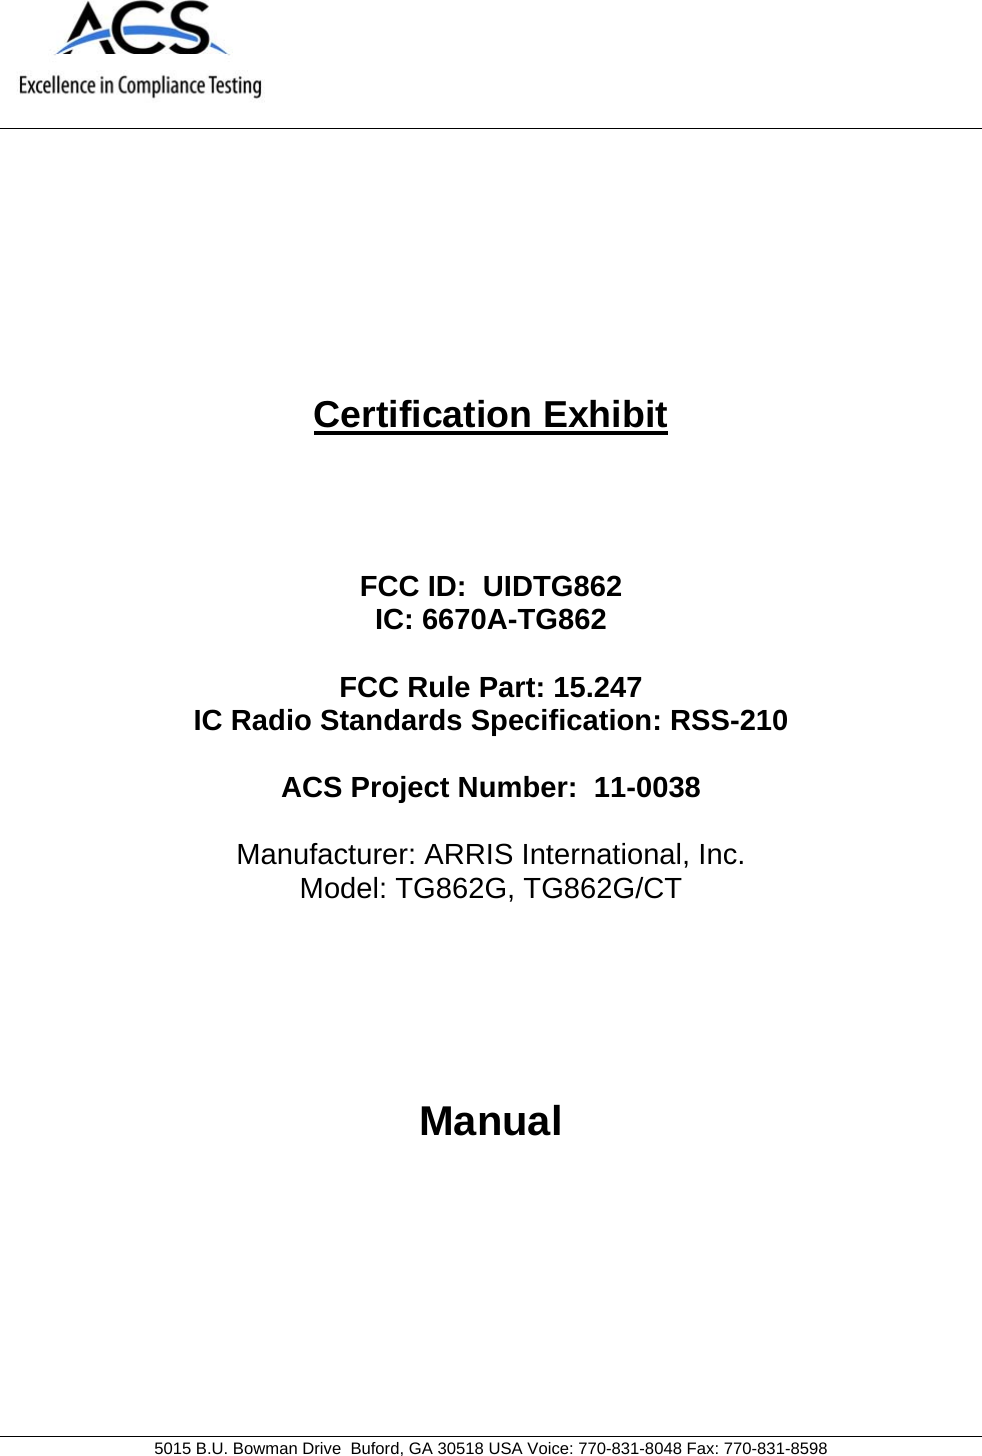     5015 B.U. Bowman Drive  Buford, GA 30518 USA Voice: 770-831-8048 Fax: 770-831-8598   Certification Exhibit     FCC ID:  UIDTG862 IC: 6670A-TG862  FCC Rule Part: 15.247 IC Radio Standards Specification: RSS-210  ACS Project Number:  11-0038   Manufacturer: ARRIS International, Inc. Model: TG862G, TG862G/CT     Manual  